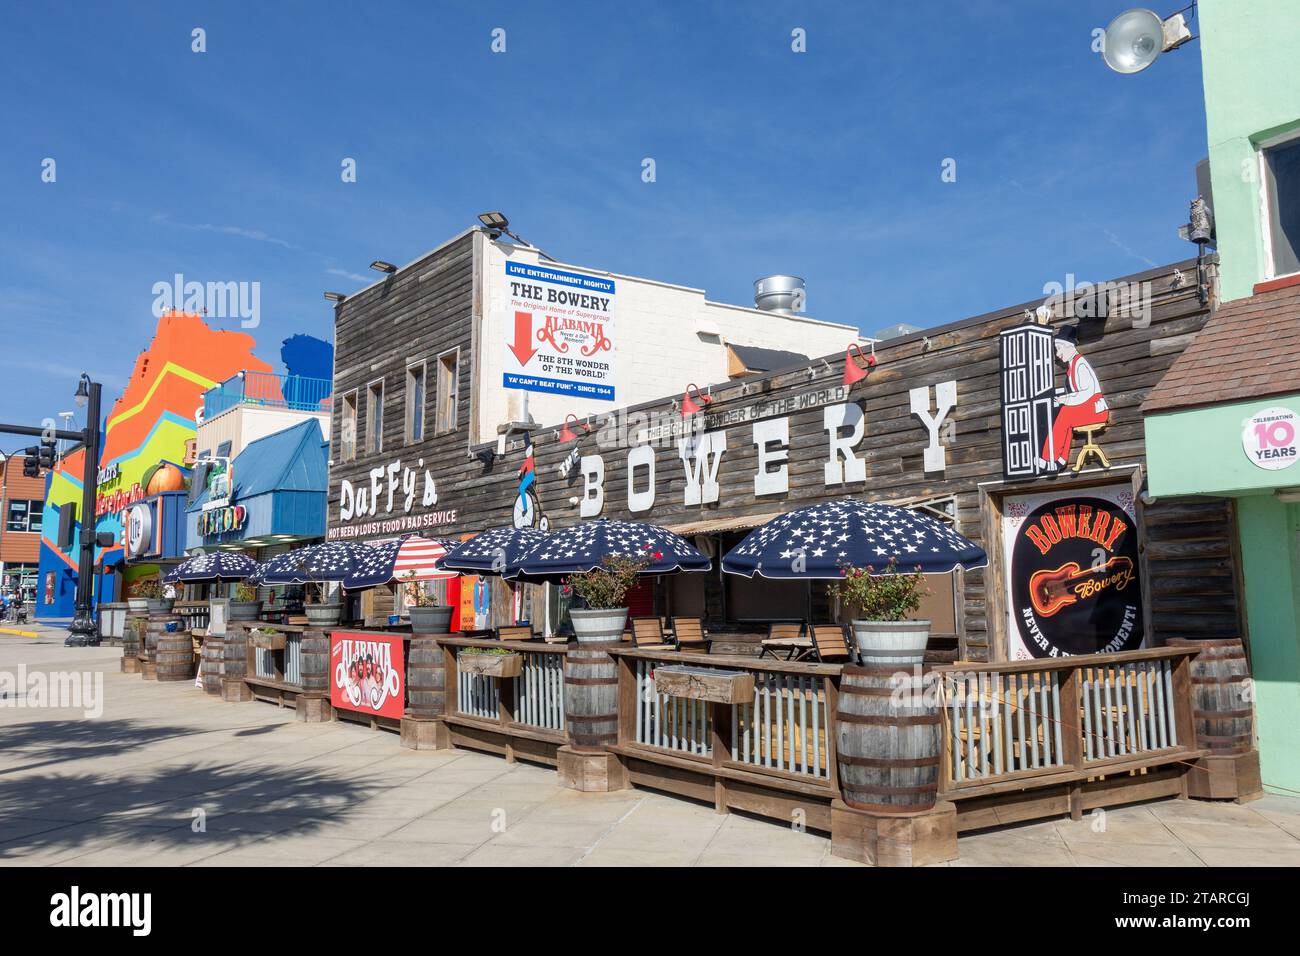 The Famous Bowery Live Music Venue Bar In Myrtle Beach, South Carolina, United States, The Home Of The Country Rock Band Alabama Stock Photo